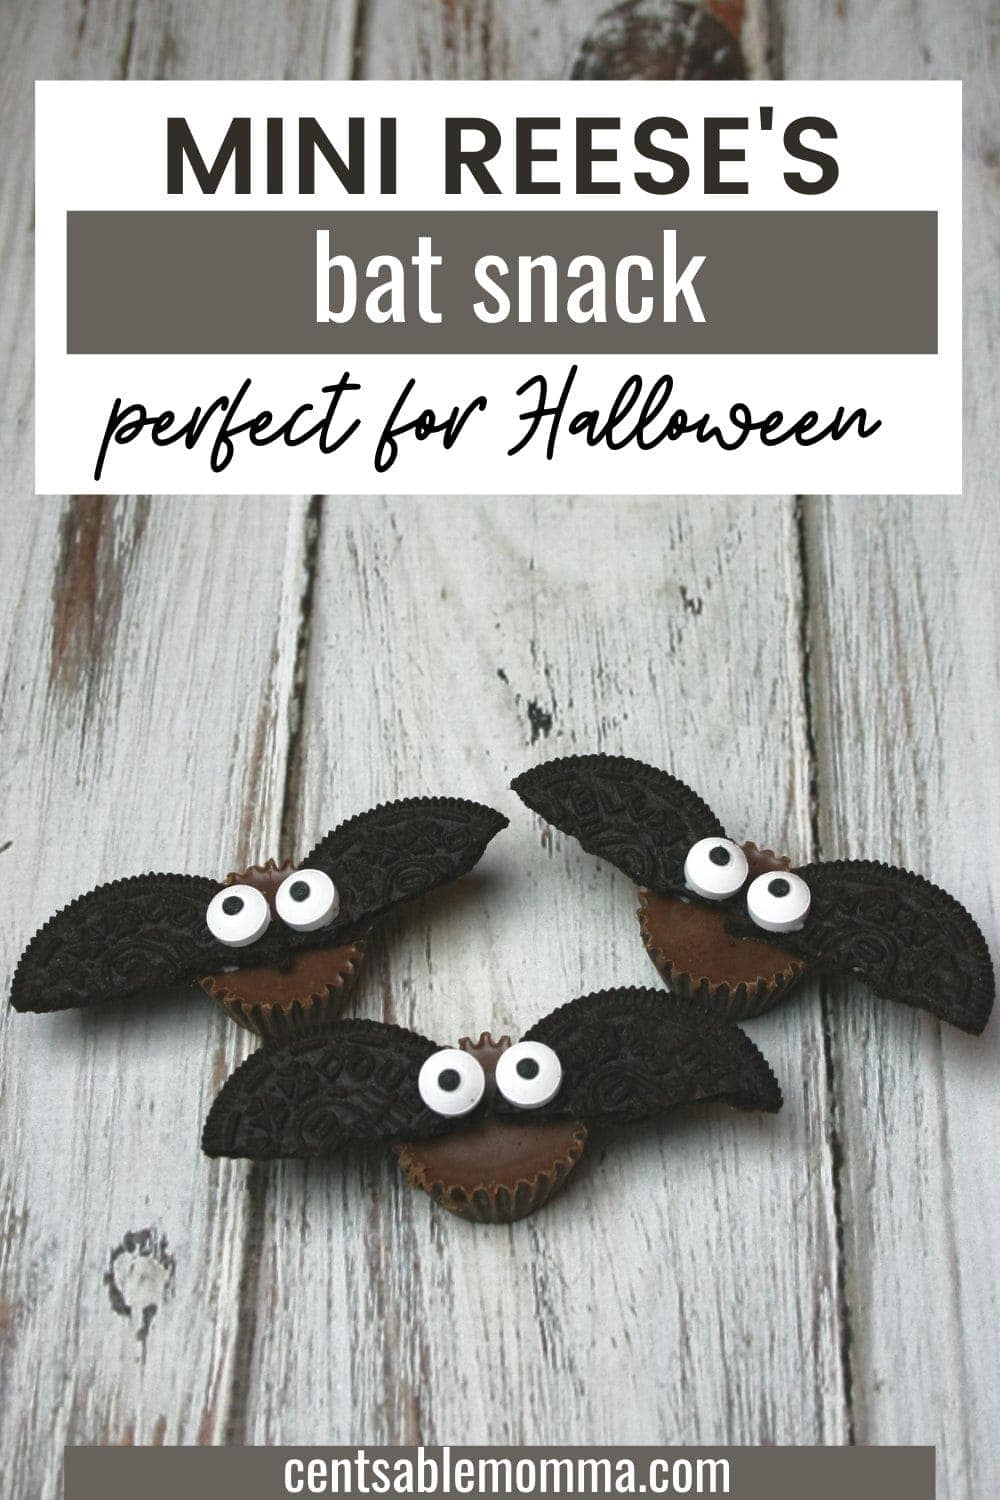 Mini Reese's Bat Snack made with Reese's, Oreos, and candy eyes.